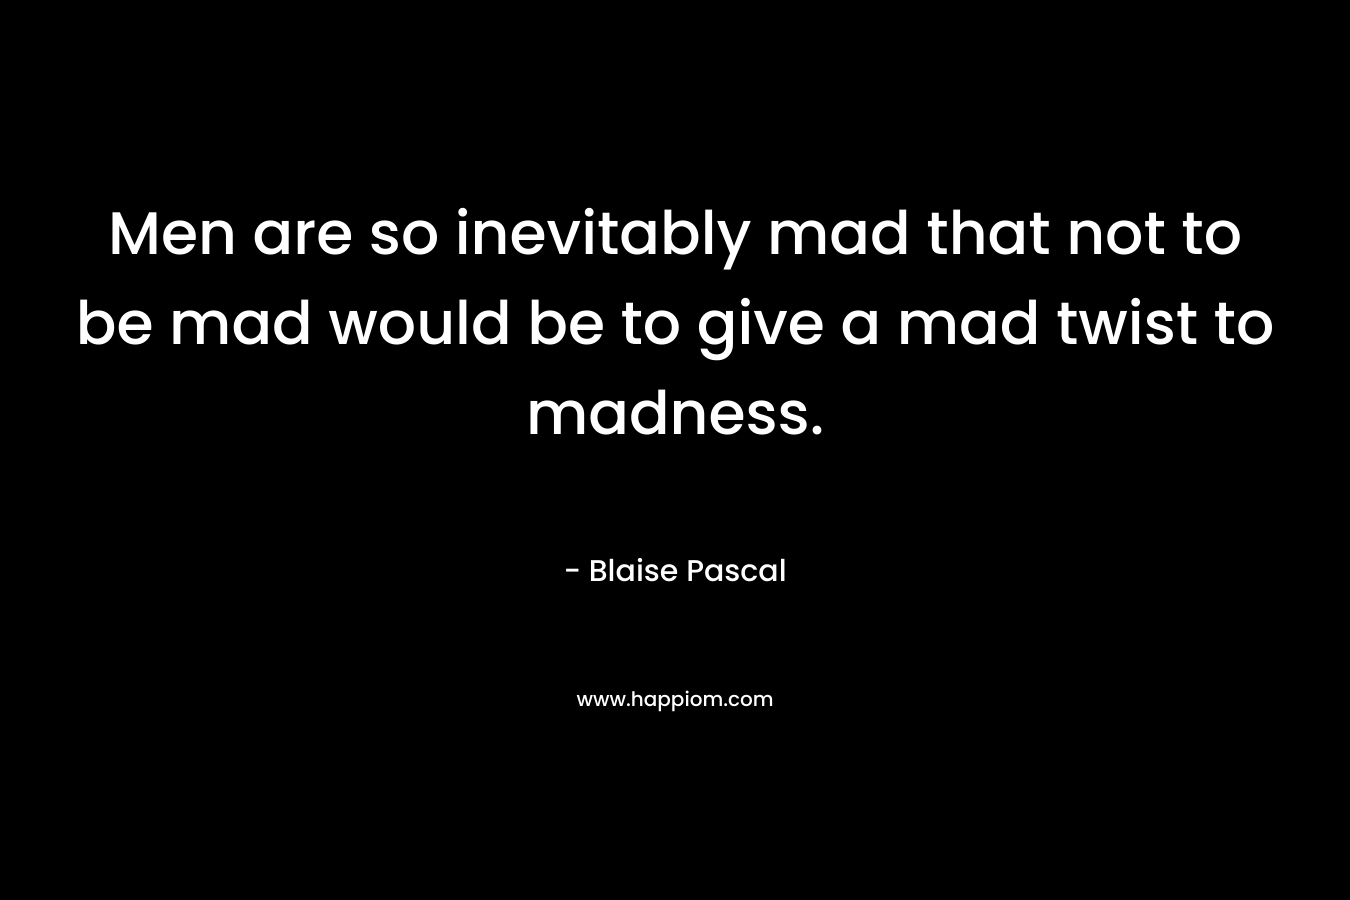 Men are so inevitably mad that not to be mad would be to give a mad twist to madness.